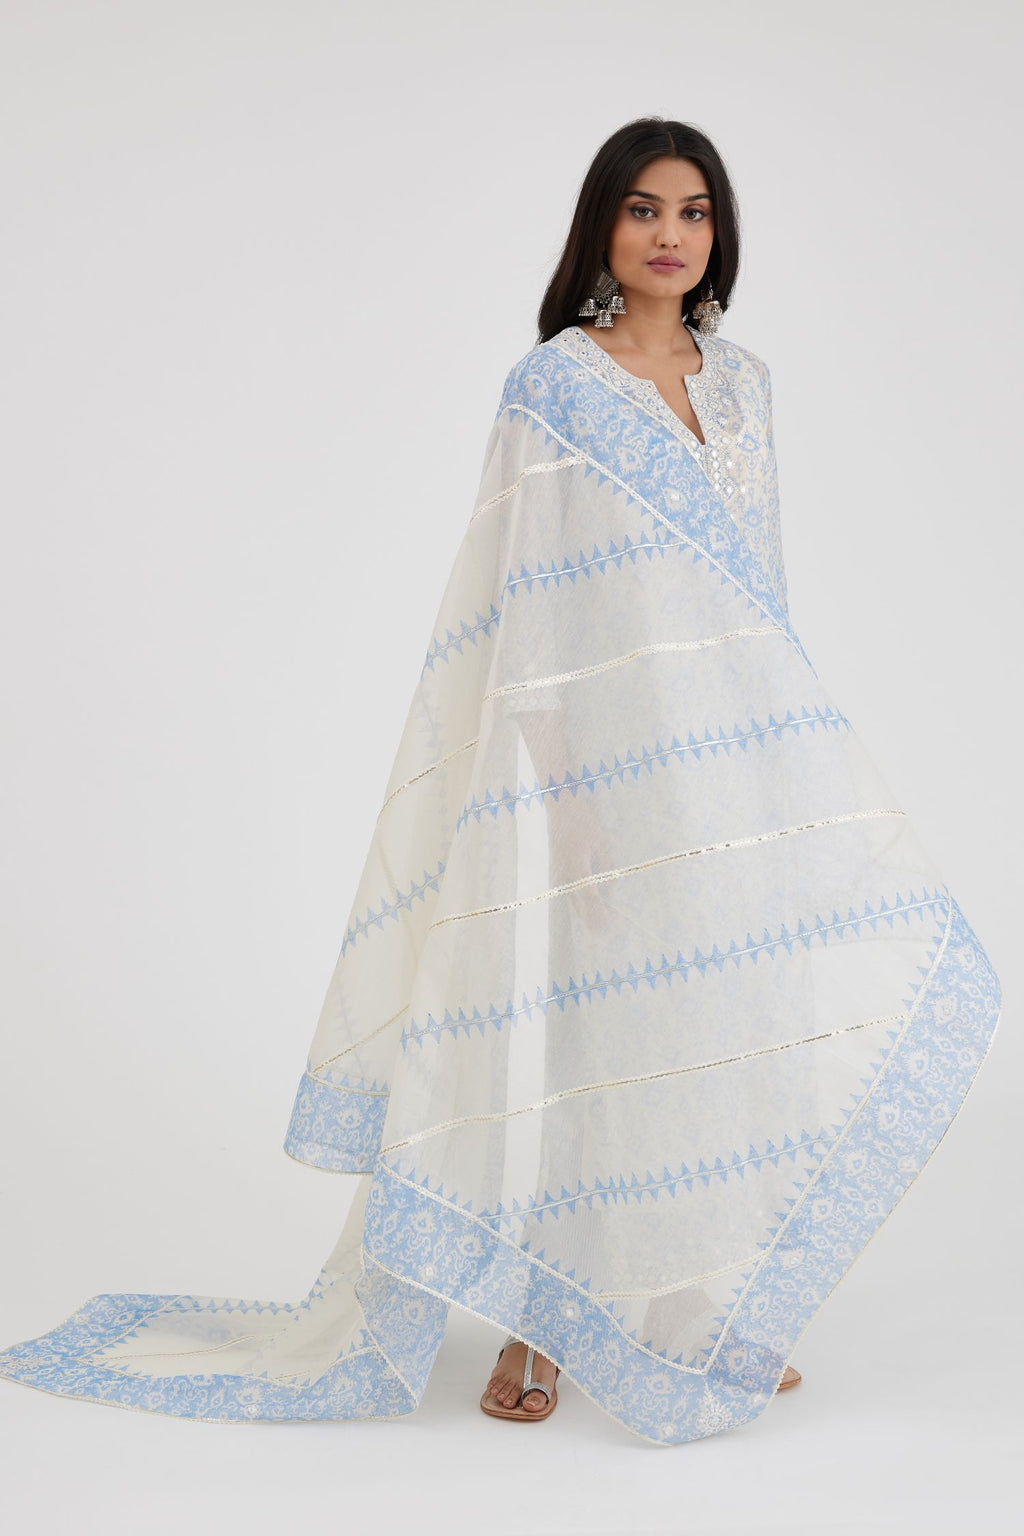 Ikat design blue and off white hand block-printed Cotton Chanderi straight long kurta set with off-white thread and mirror embroidery.